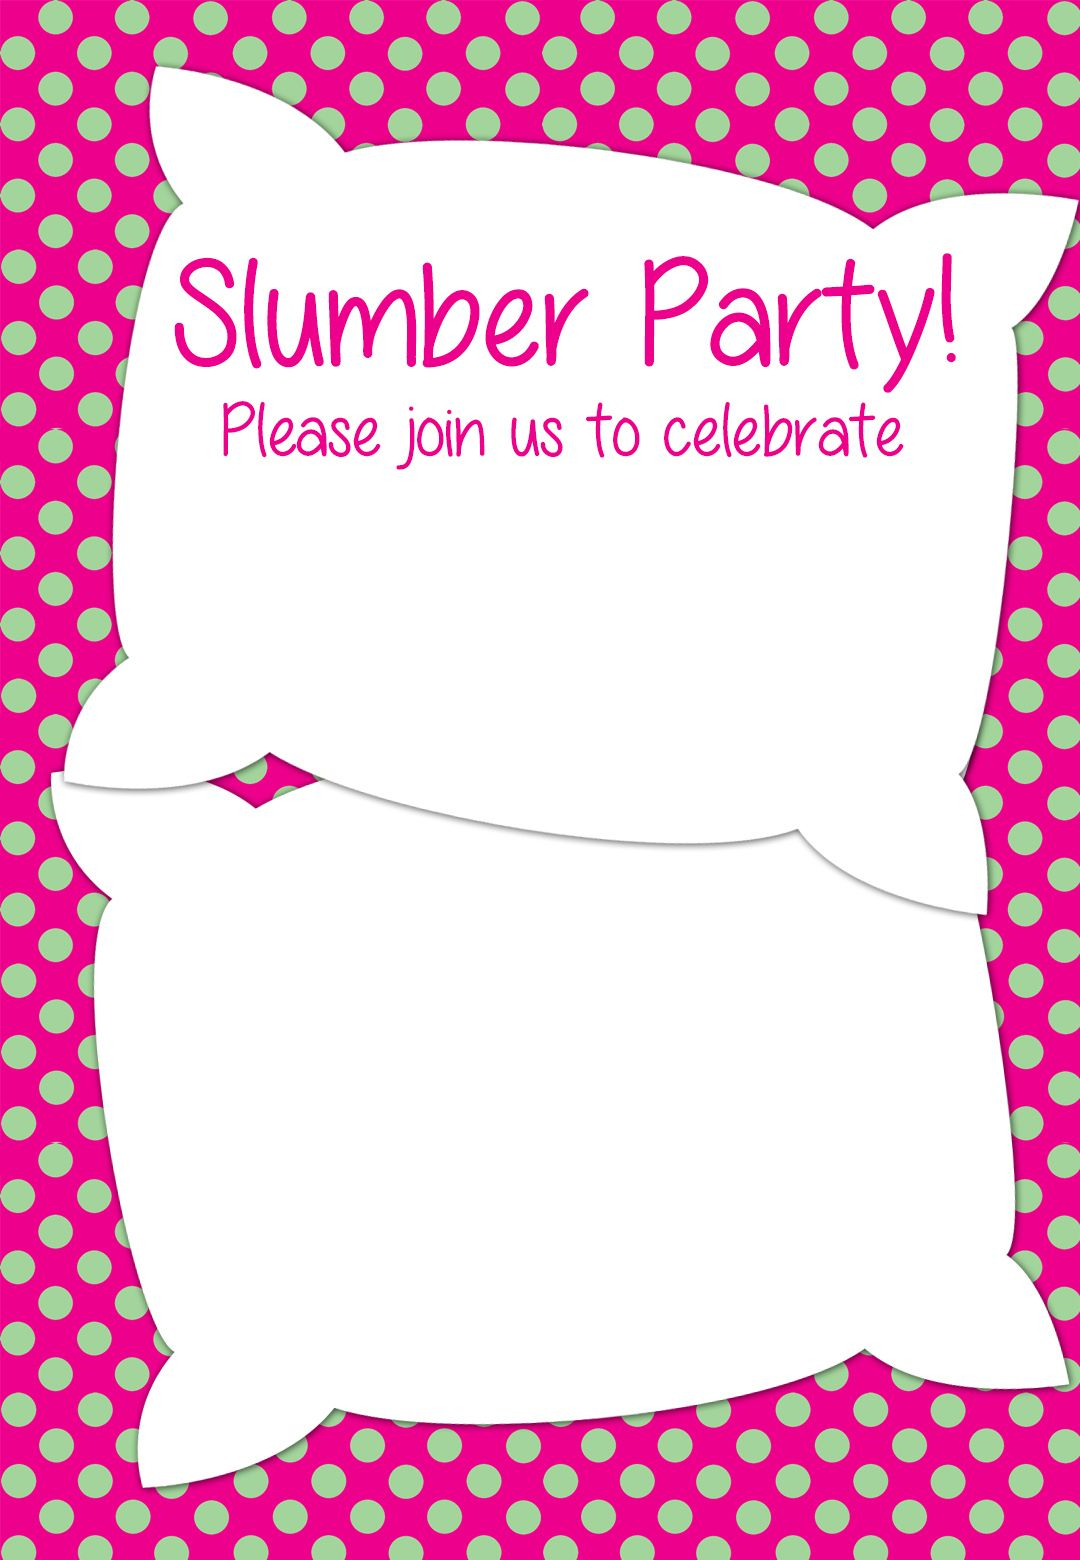 Free Printable Slumber Party Invitation Party Ideas In 2019 inside sizing 1080 X 1560